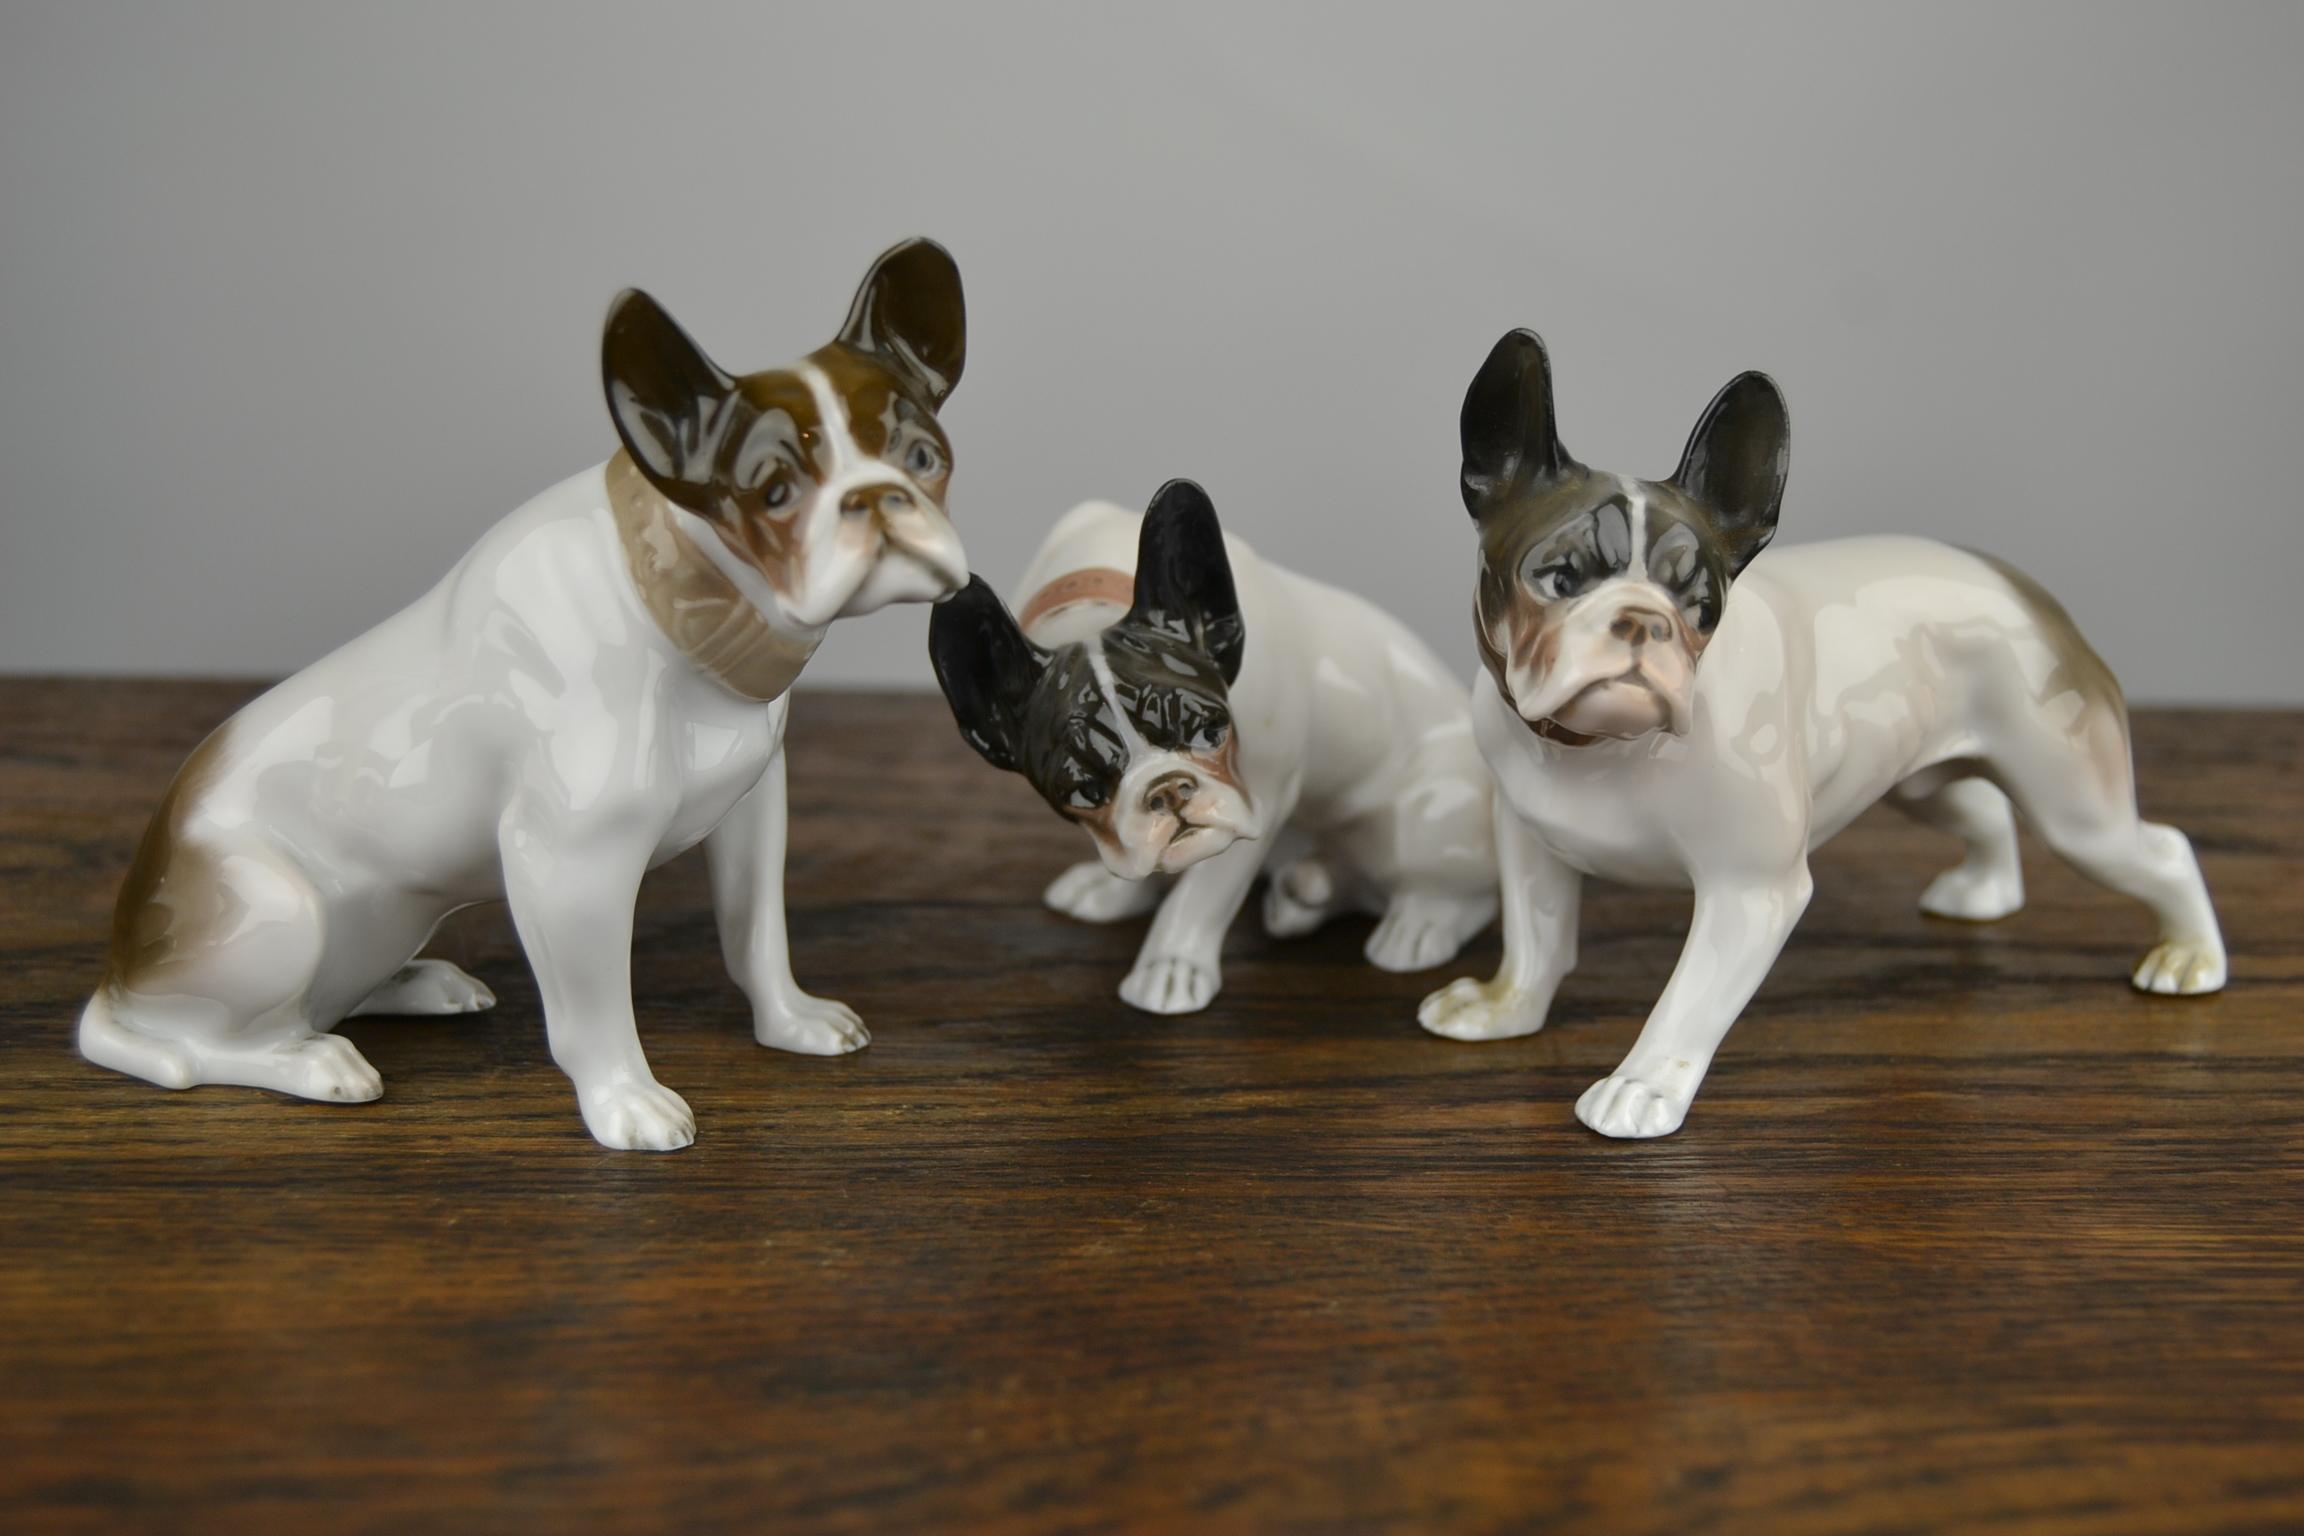 Rare Porcelain French Bulldog Sculpture Signed and Designed by F.Diller. 
This Porcelain Dog Sculpture was made by Rosenthal Selb Bavaria Germany in the Early 20th Century. It's an Antique Dog Sculpture. 
A sitting Frenchie with a very expressive